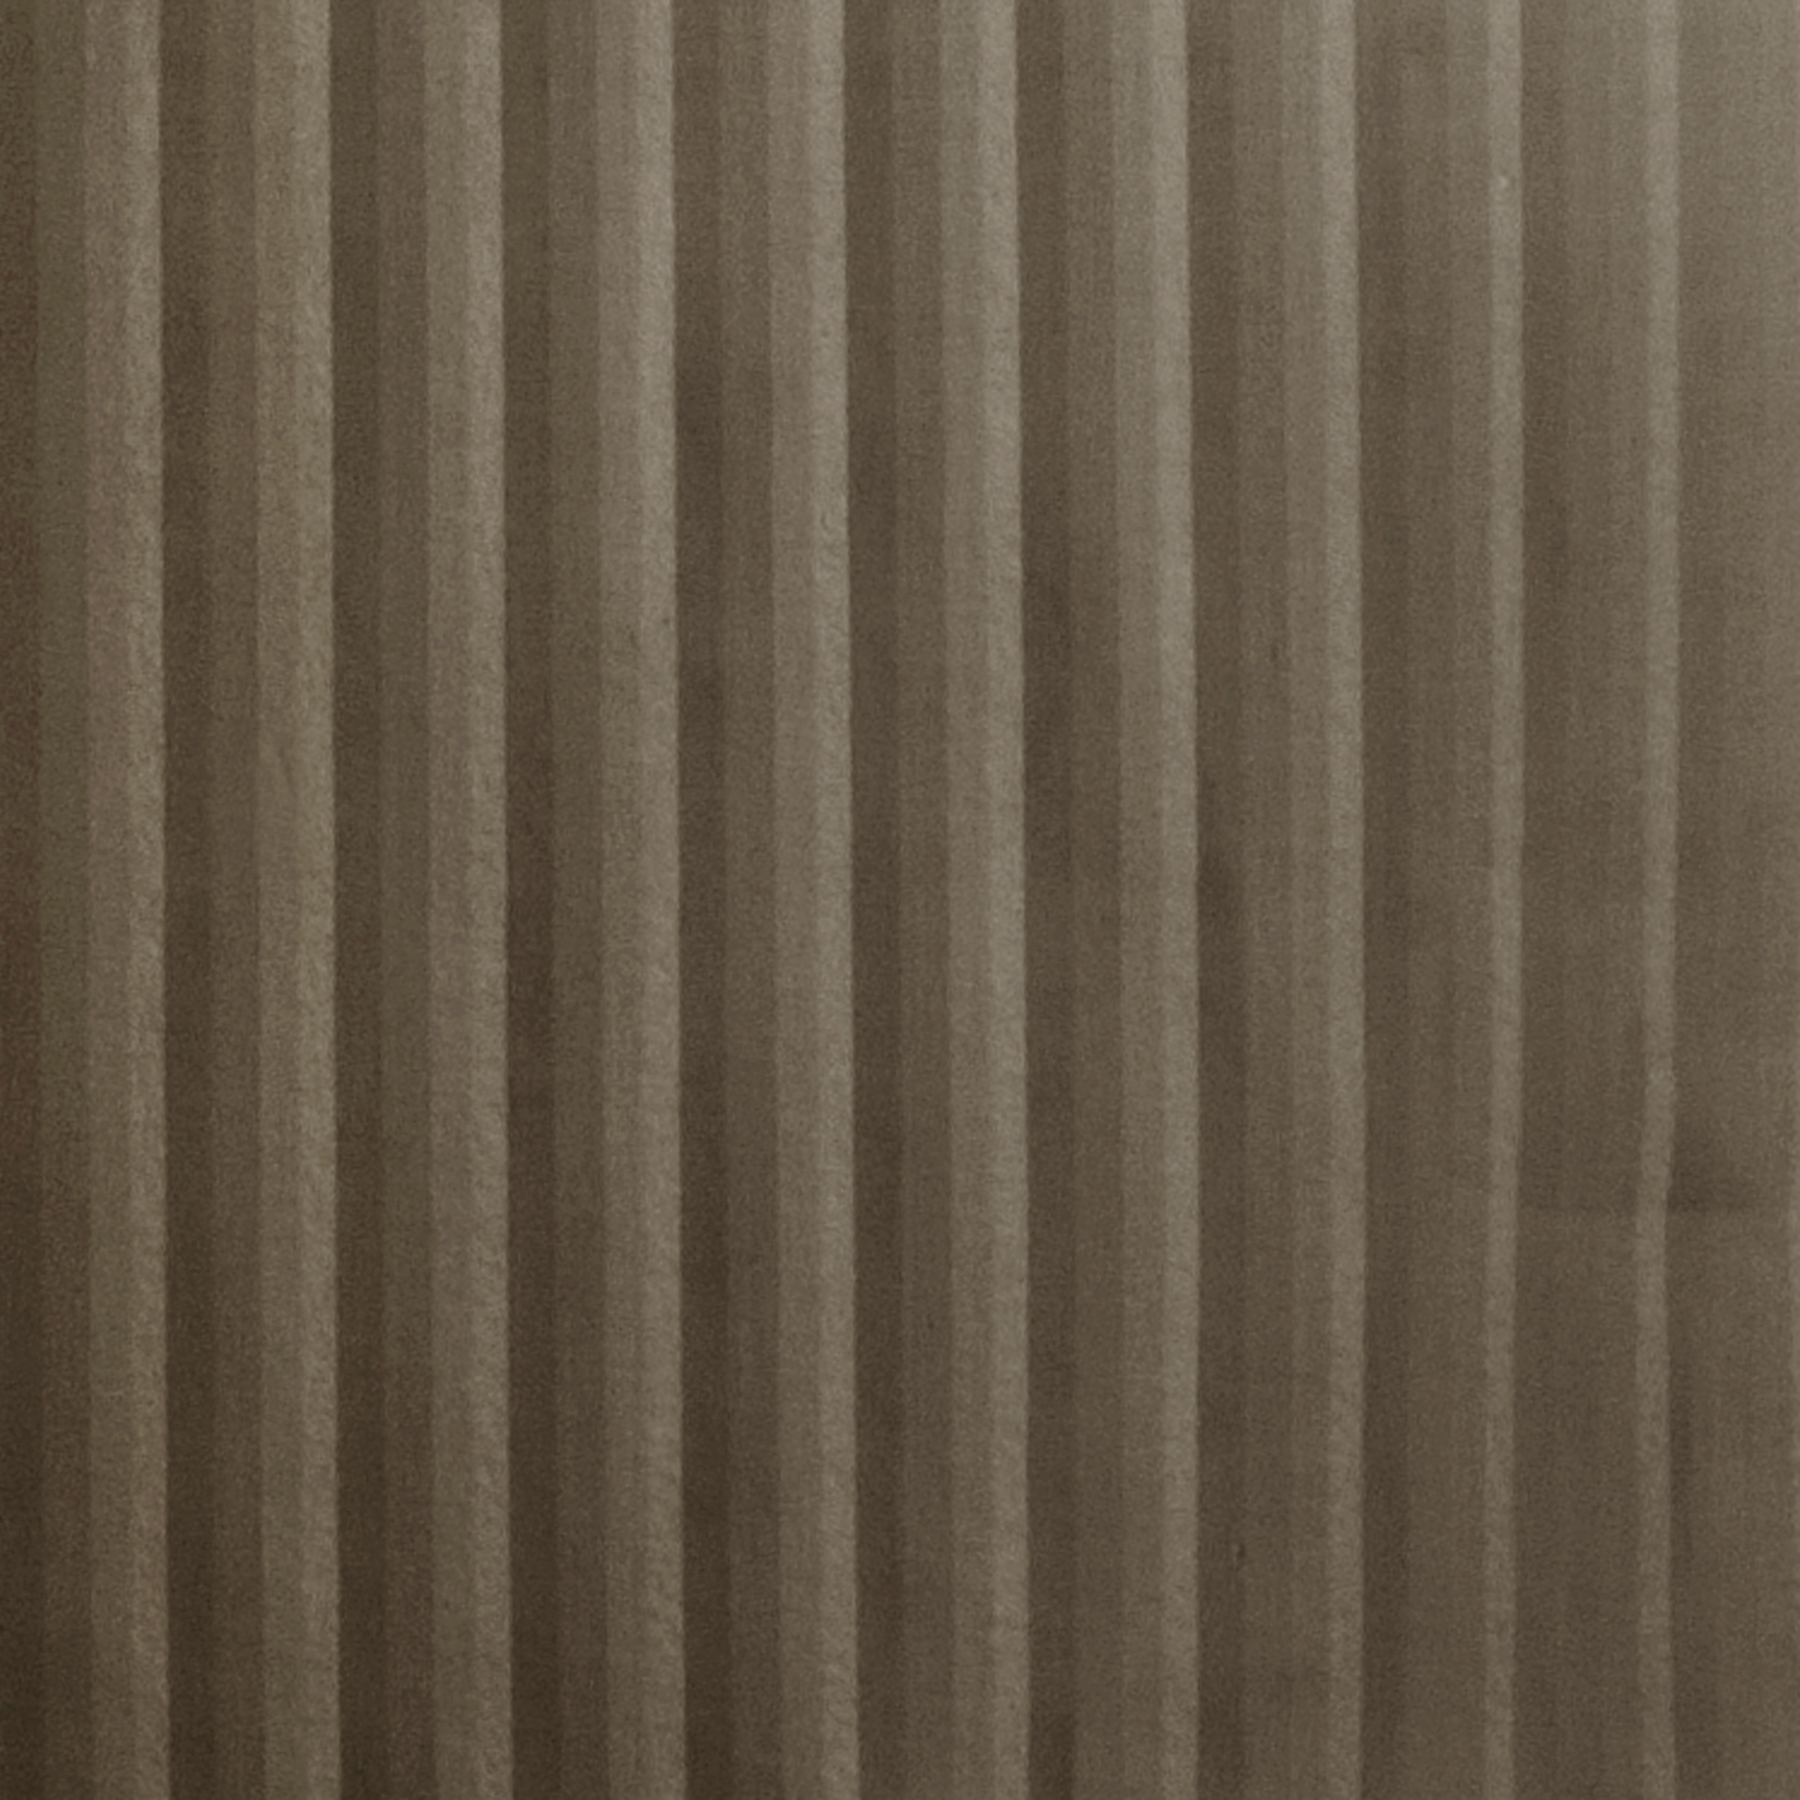 Better Homes & Gardens Vertical Stripe Rod Pocket Sheer Curtain Panel, 52" x 84", Beige/Clay - image 3 of 5